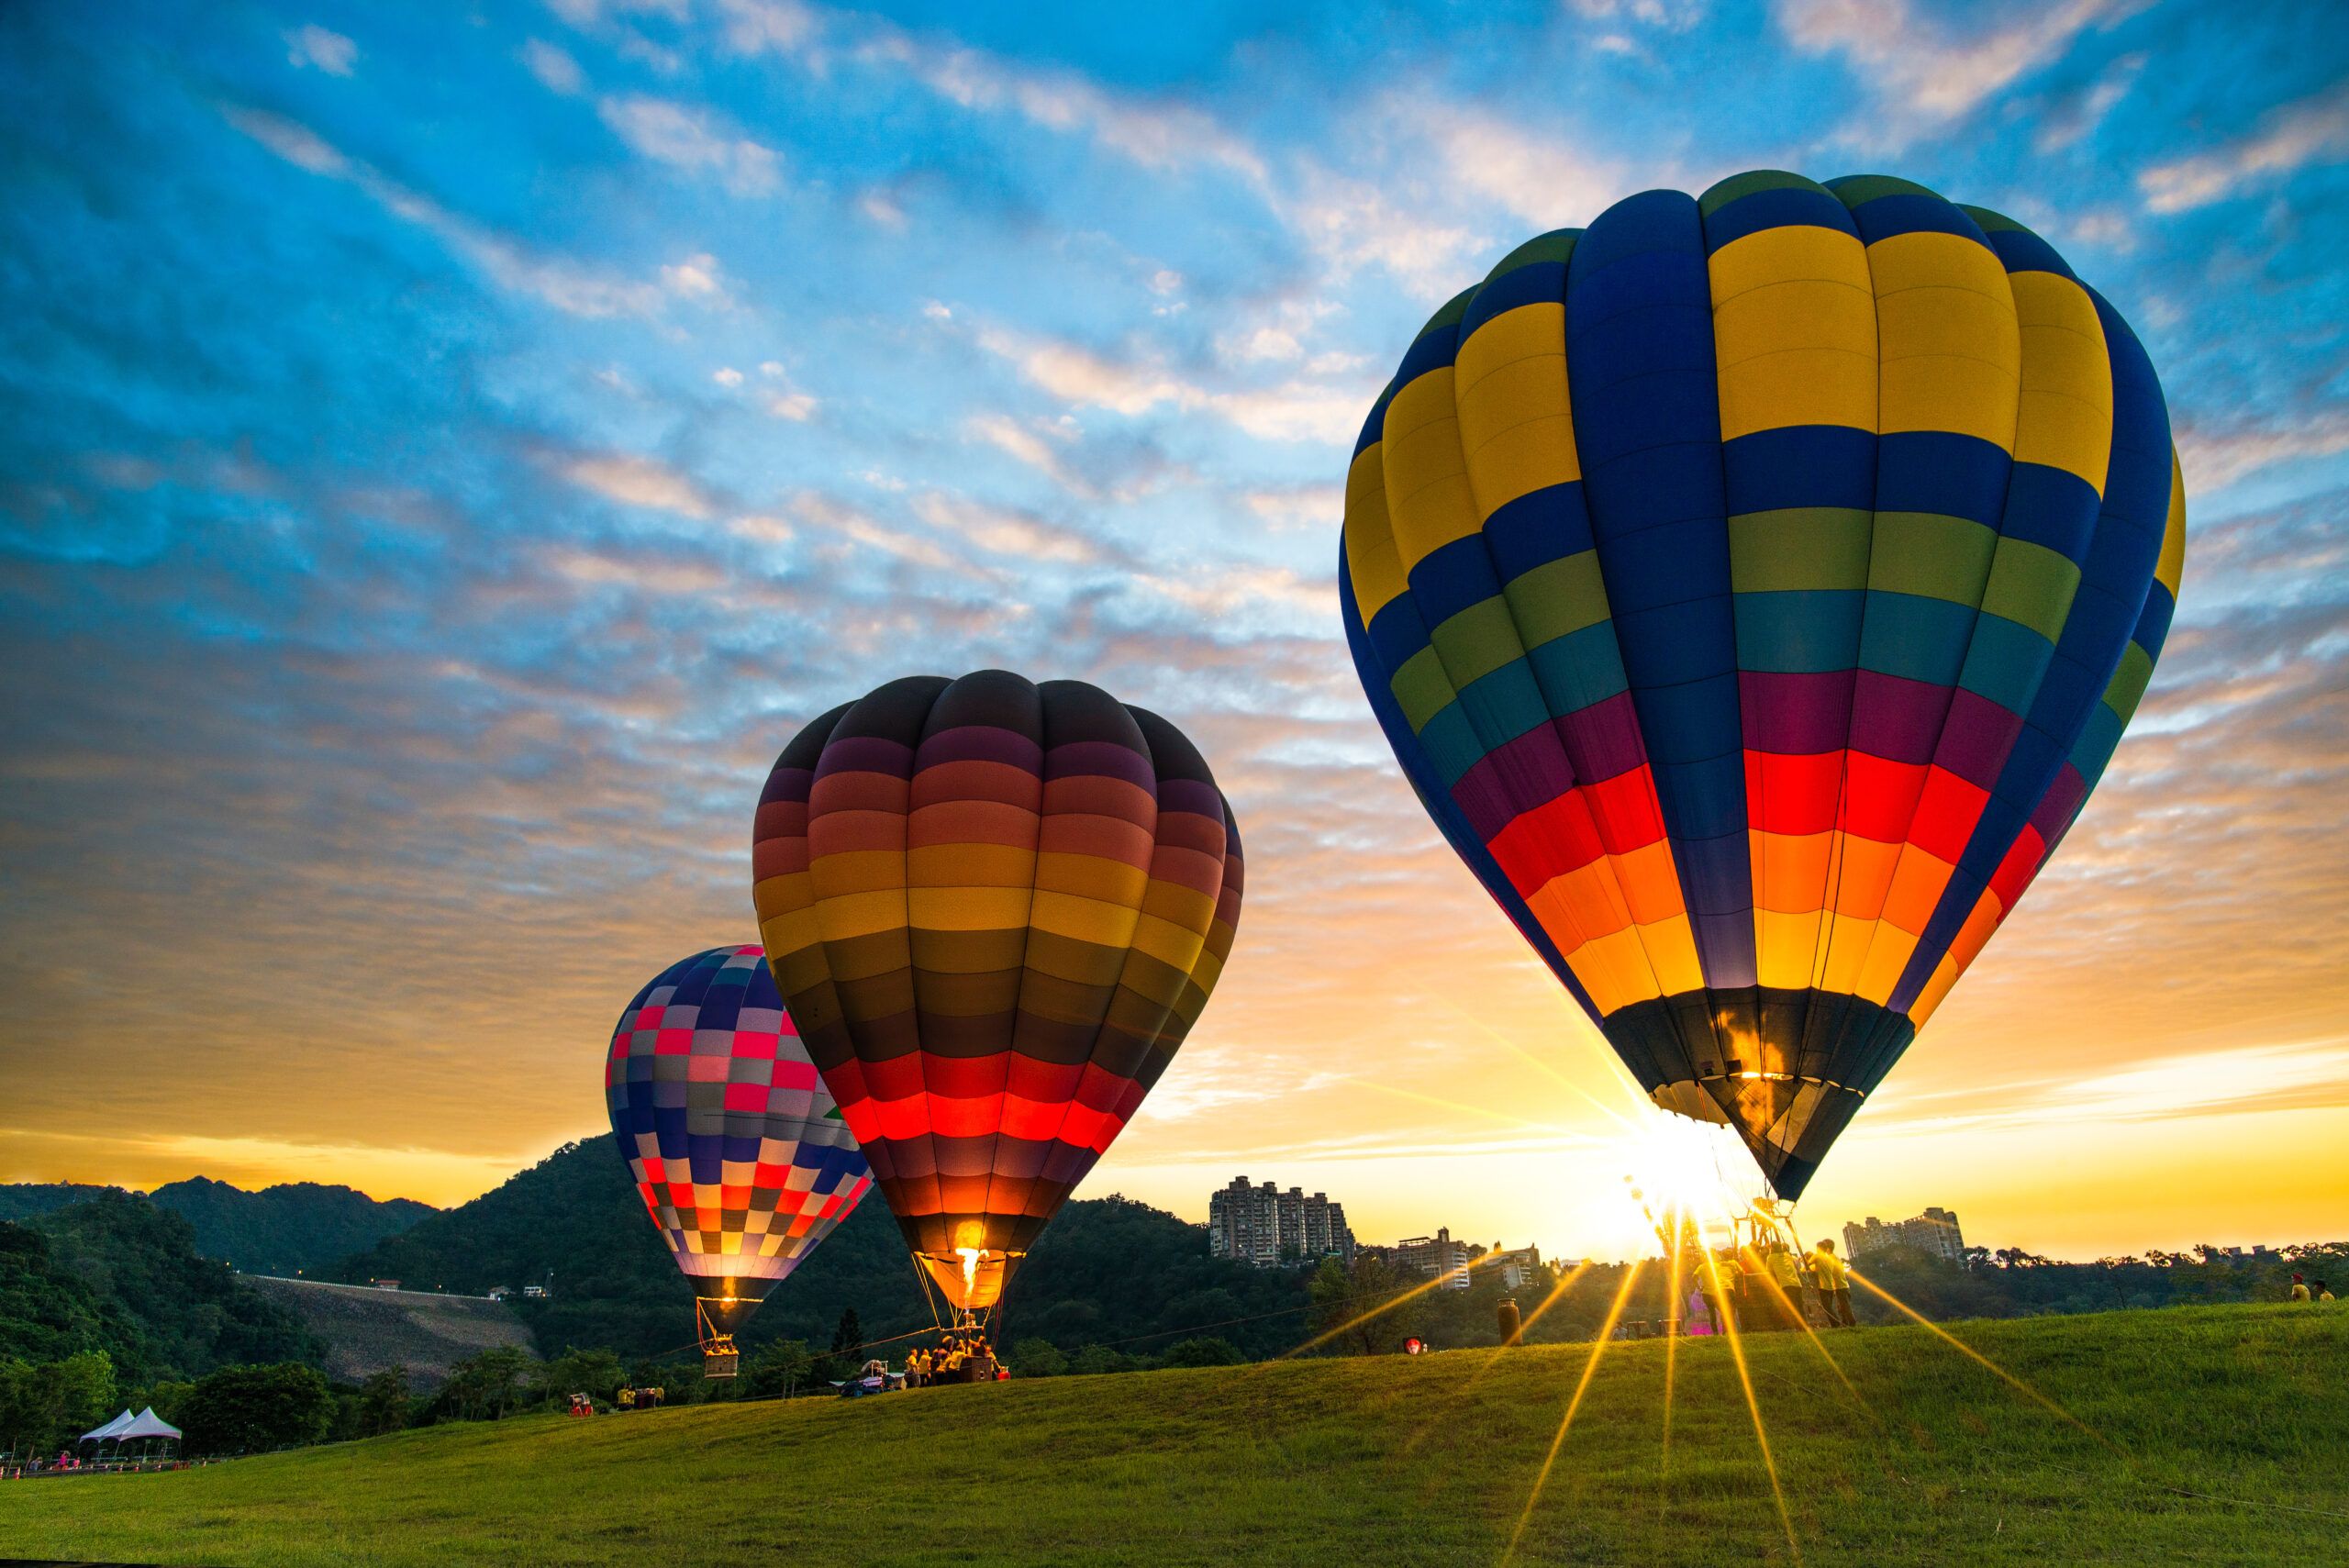 Hot air balloons floating above the ground in a field.